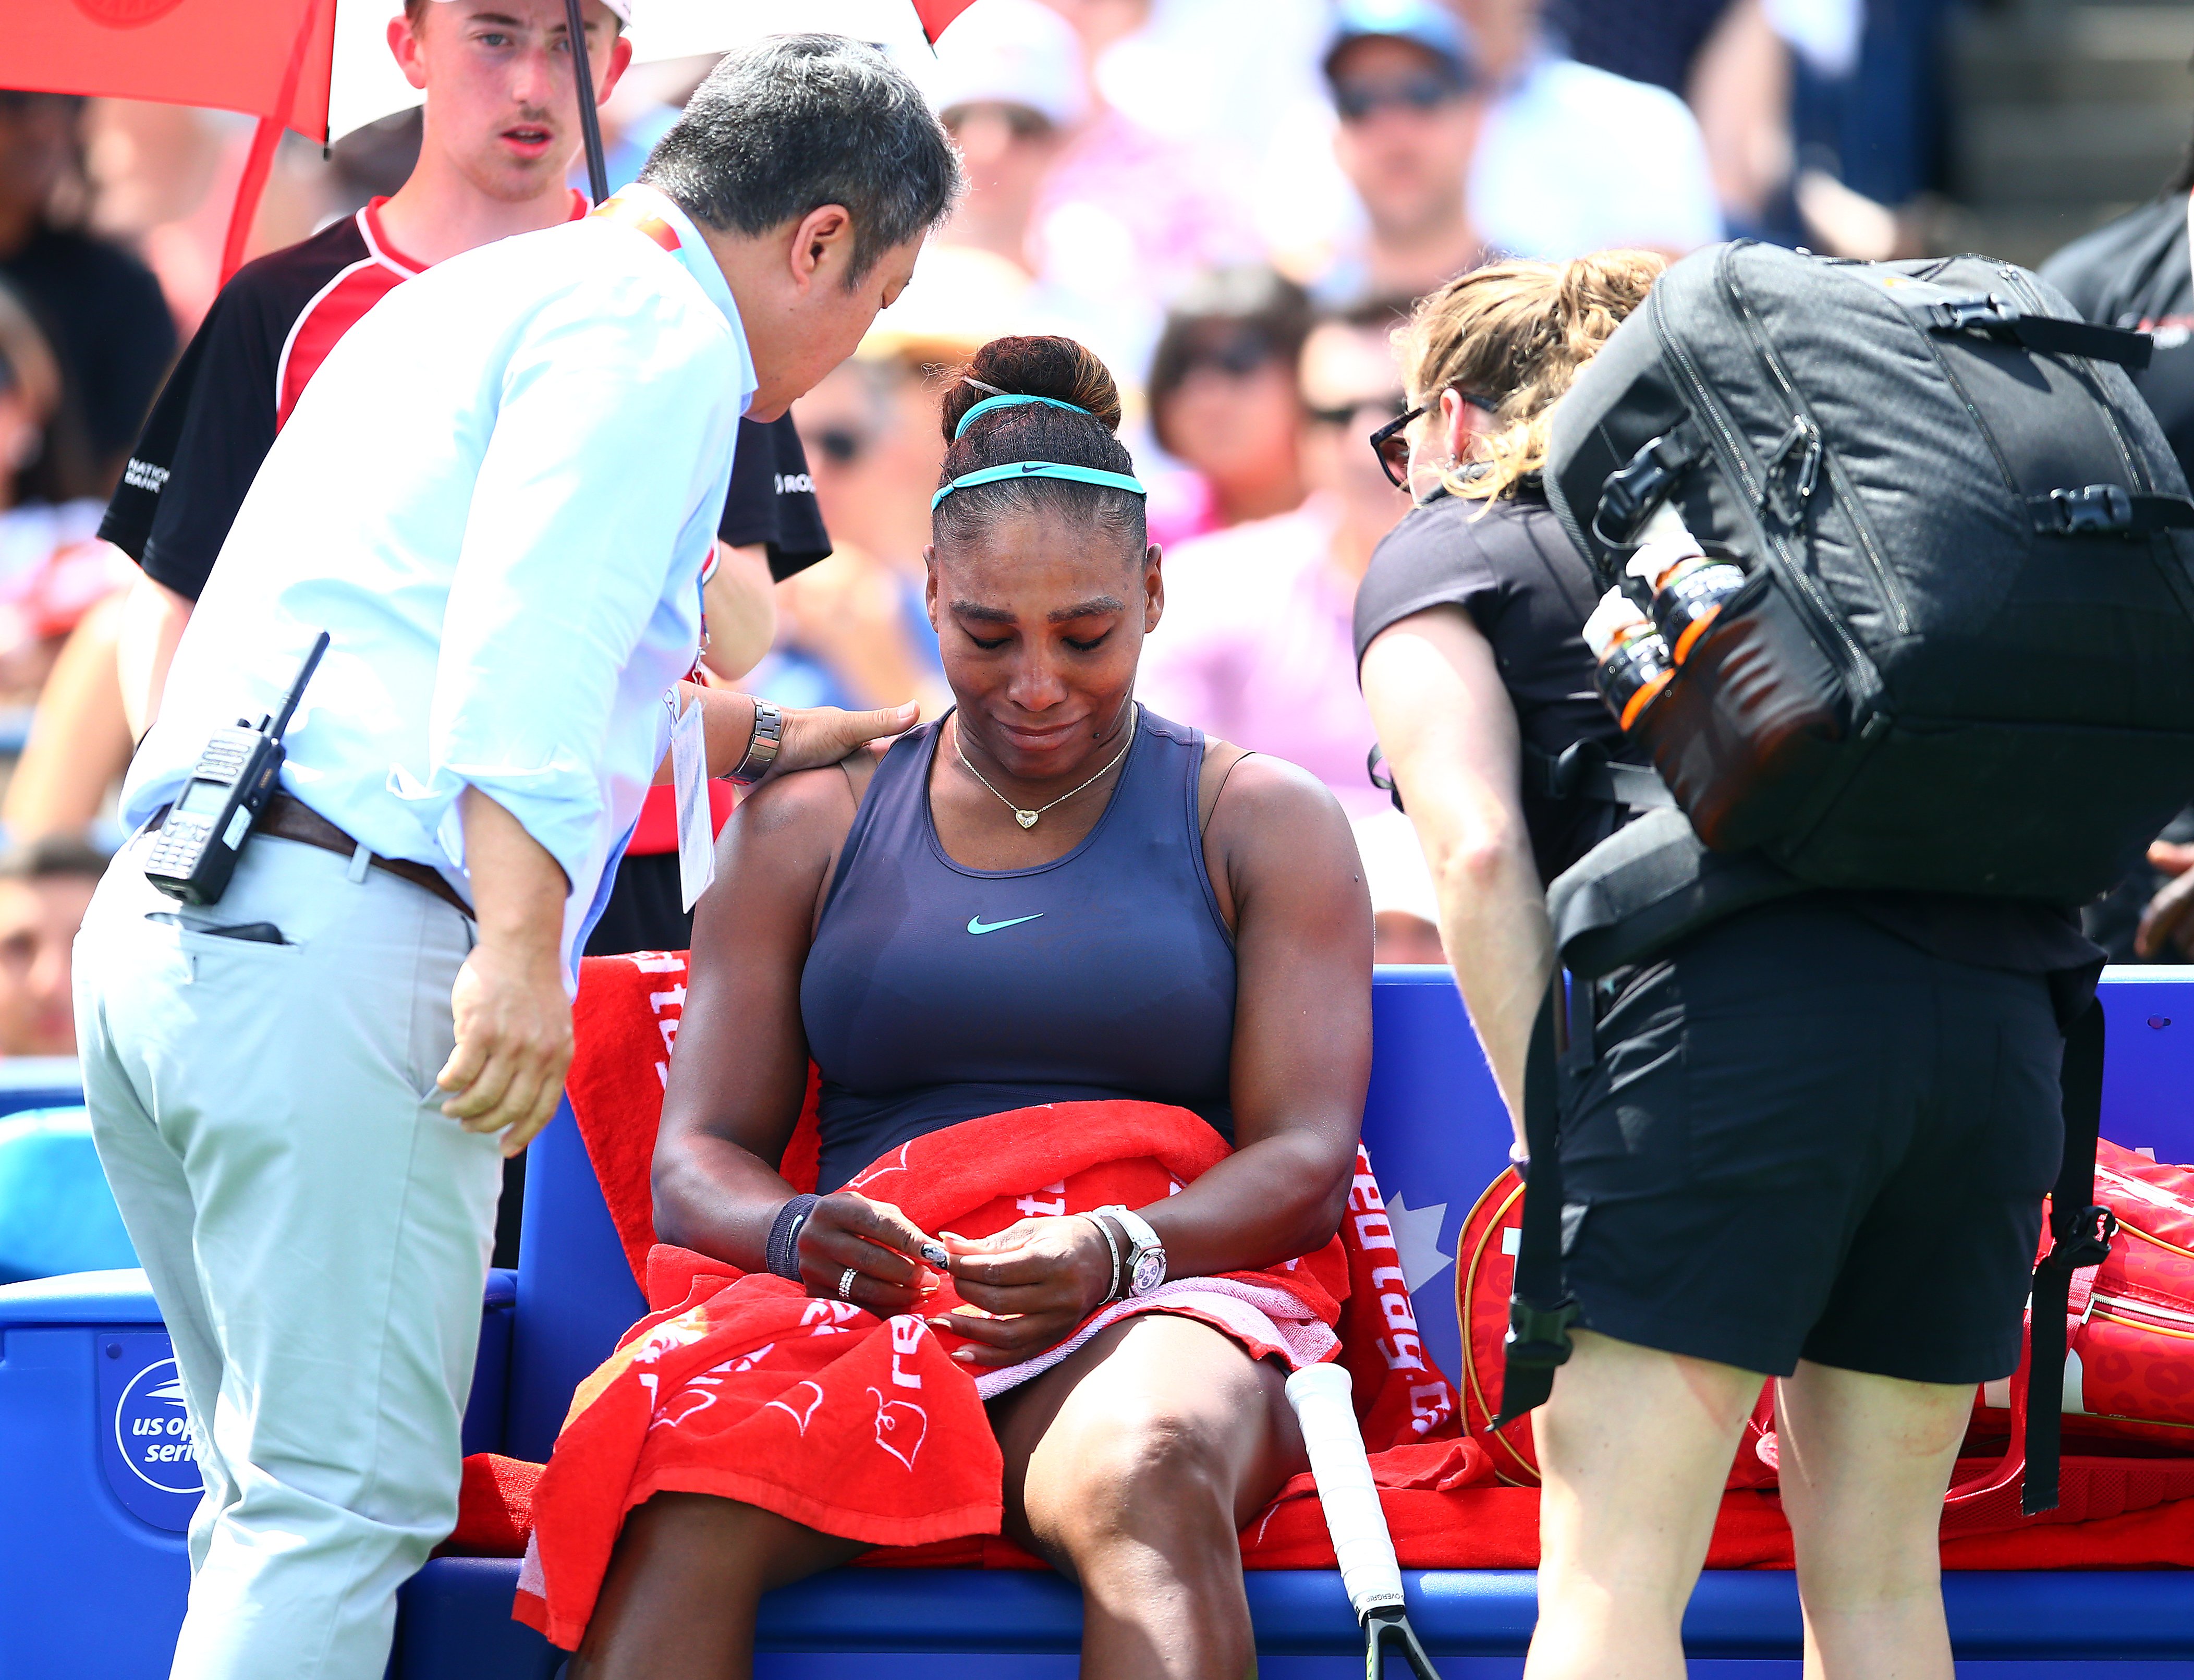 Serena Williams sitting on a bench after suffering a back injury at the 2019 Rogers Cup in Toronto, Canada. | Photo: Getty Images